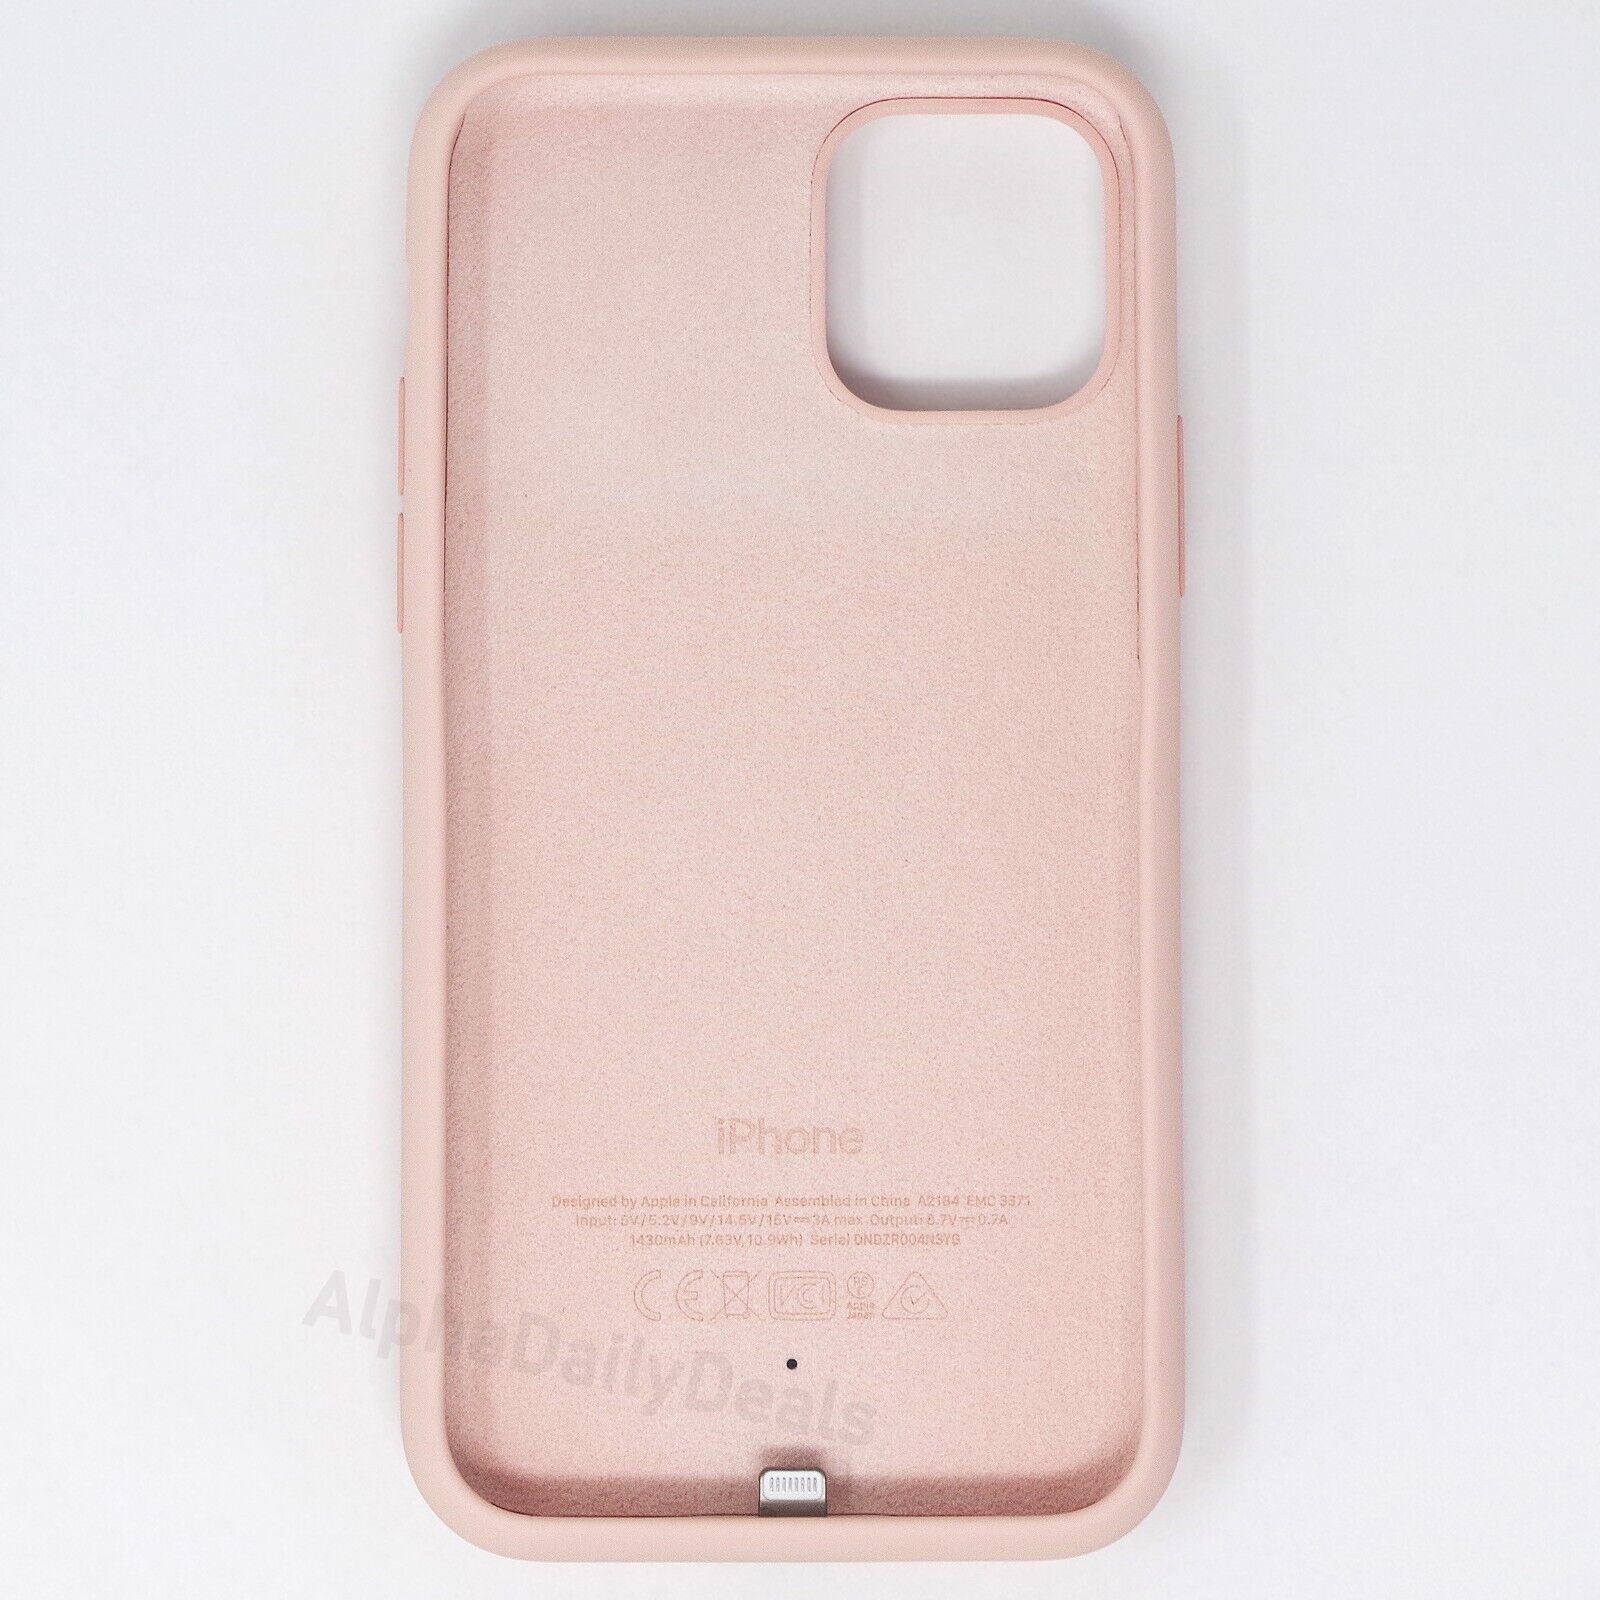 Apple Smart Battery Case for iPhone 11 Pro - Pink Sand for sale 